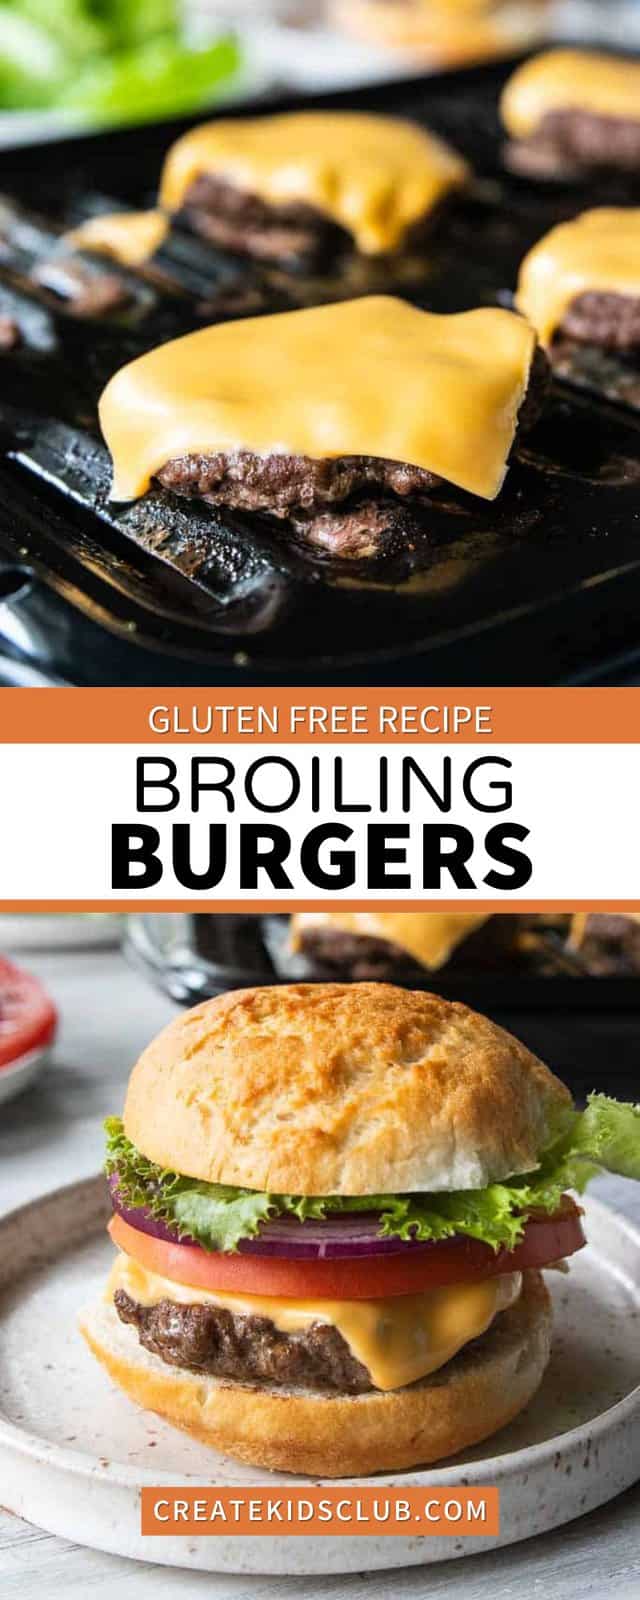 Pinterest image of broiling burgers